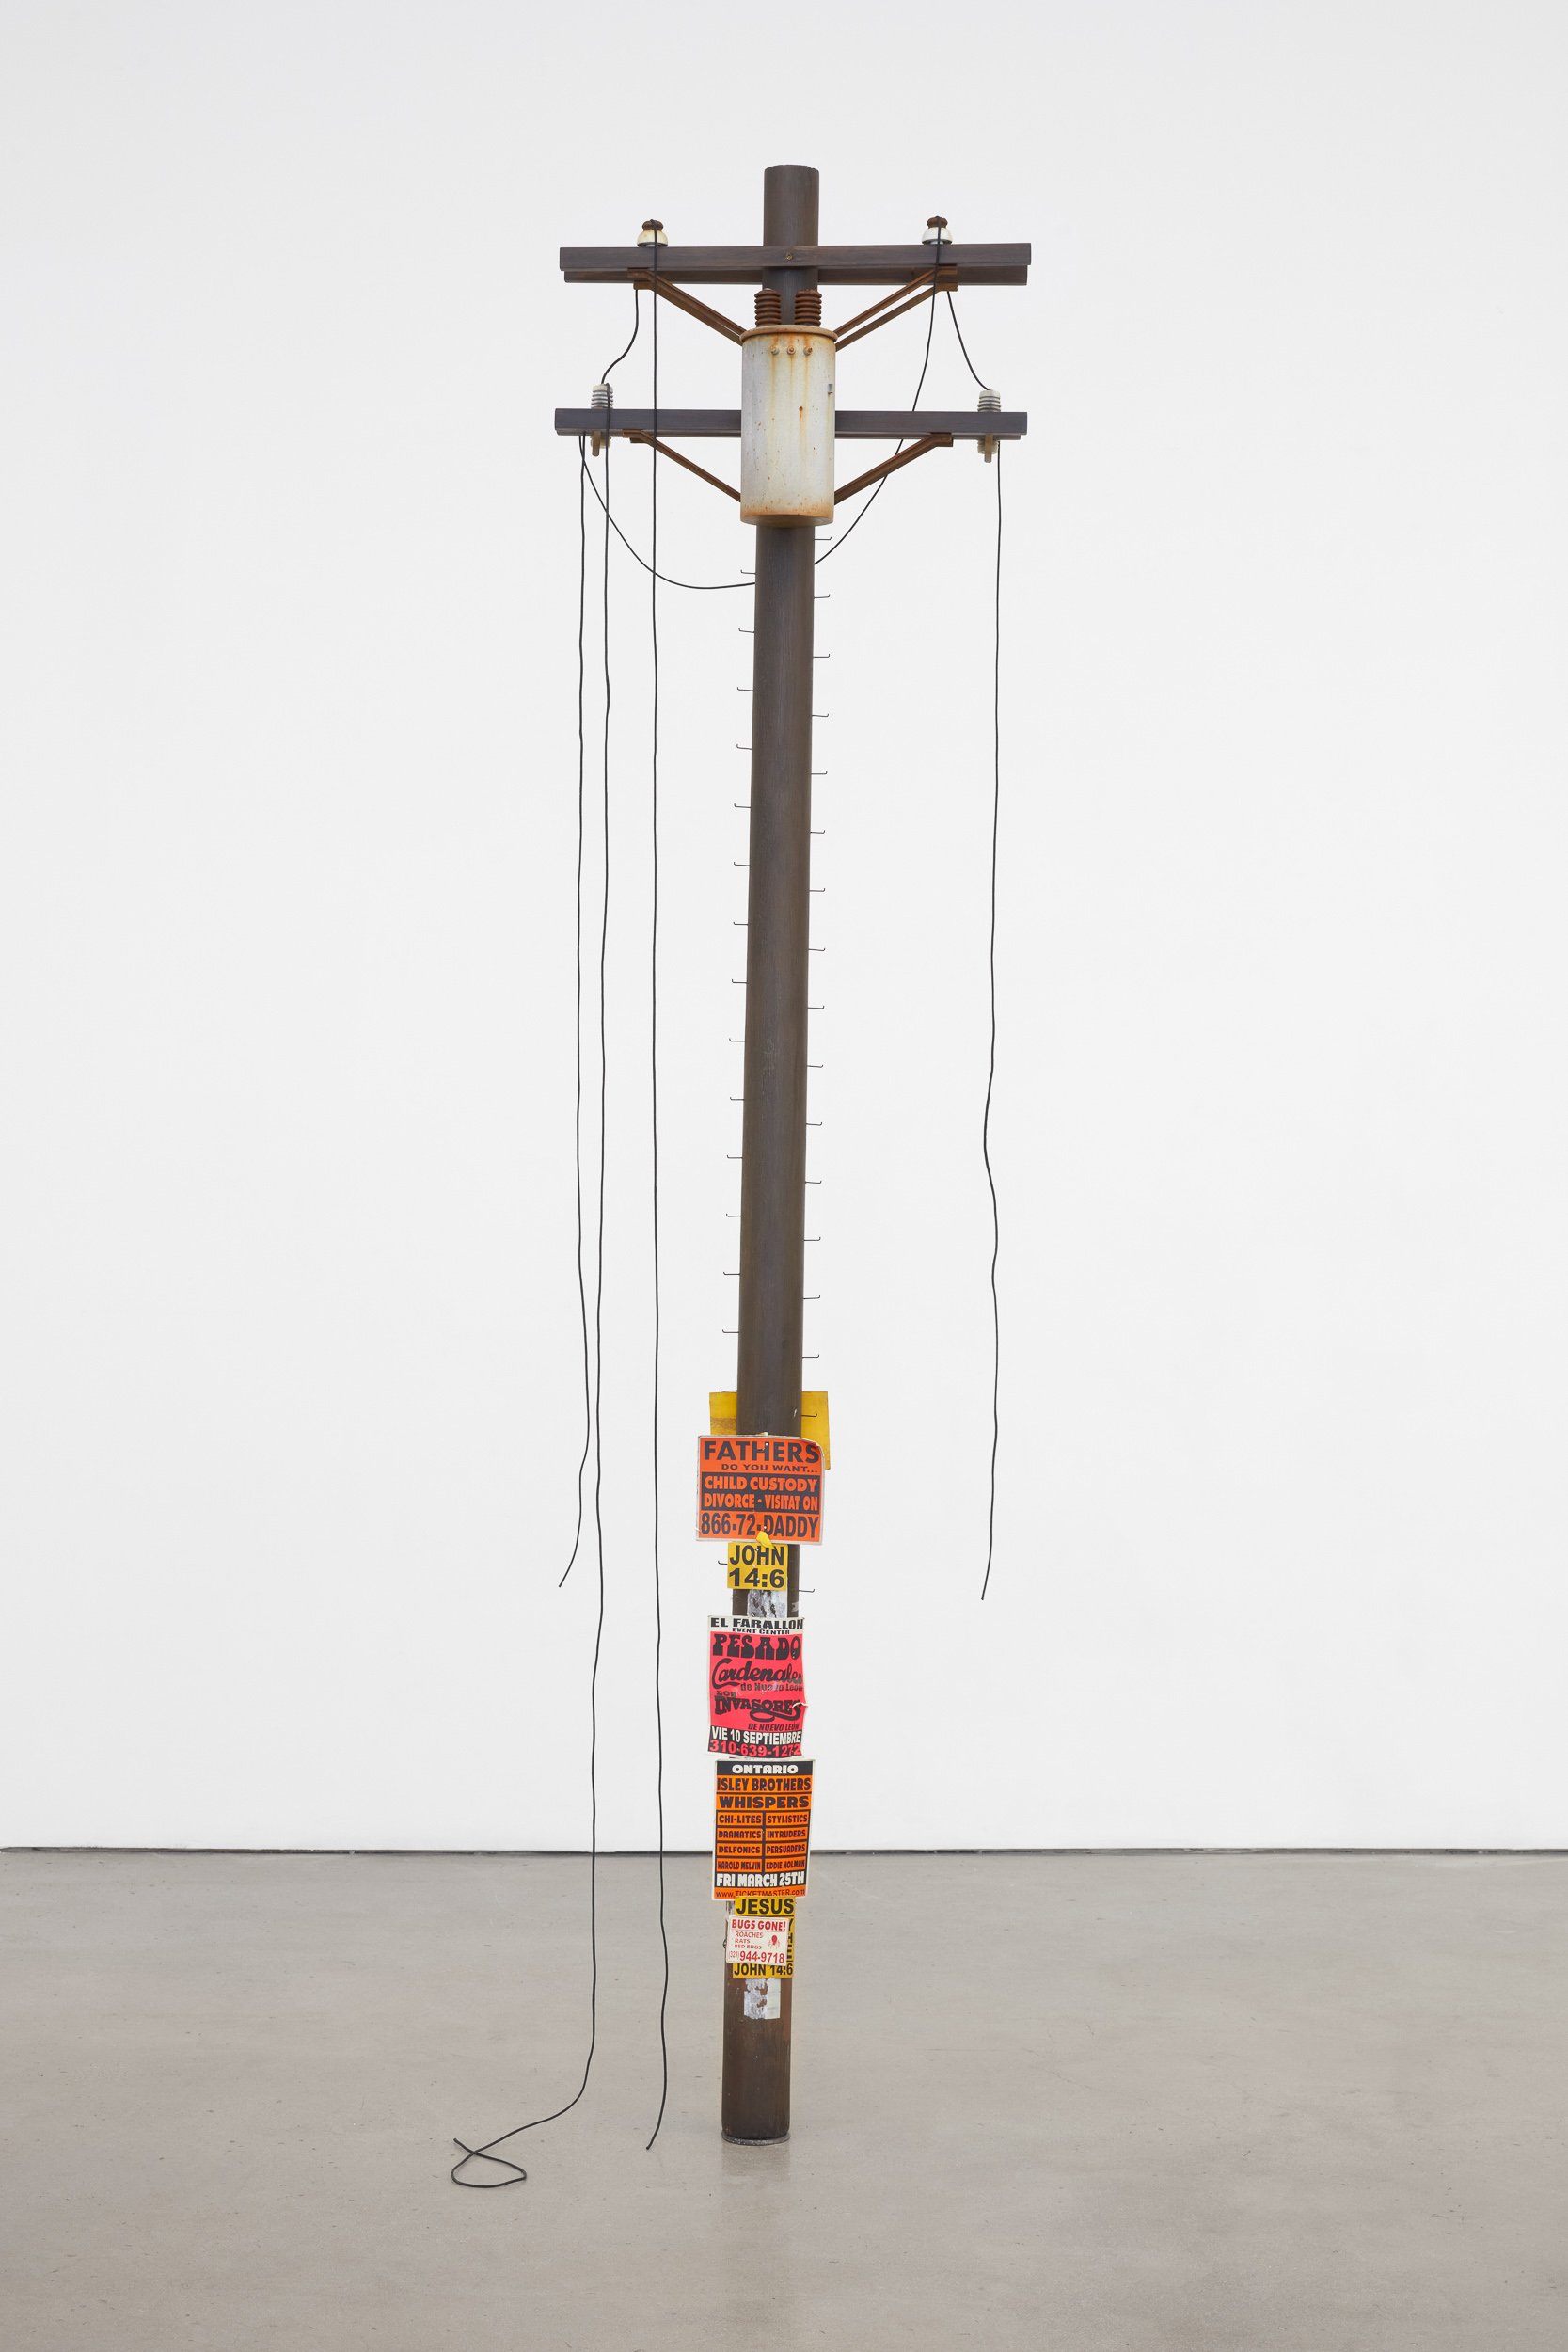   Totem,  2022. Bondo, acrylic and solvent based paints on wood, paper, steel, nylon shoelace, PVC, and vinyl. 96 x 23 x 10 inches 